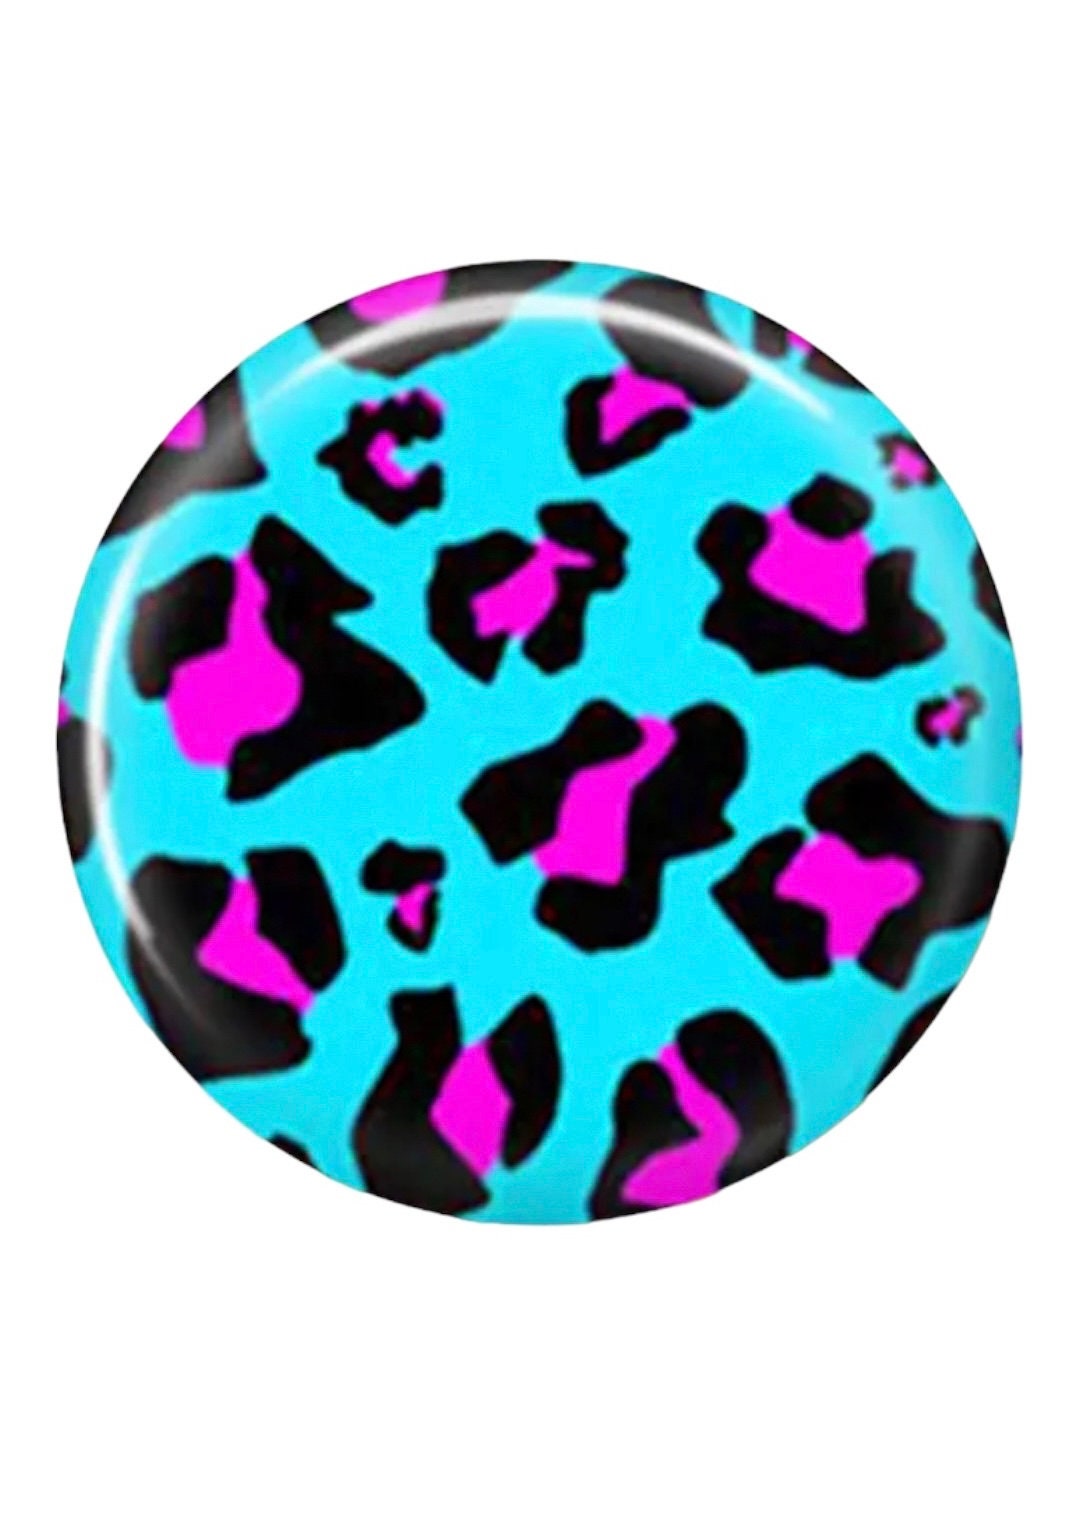 round blue and pink leopard pattern glass cabochons, 10mm